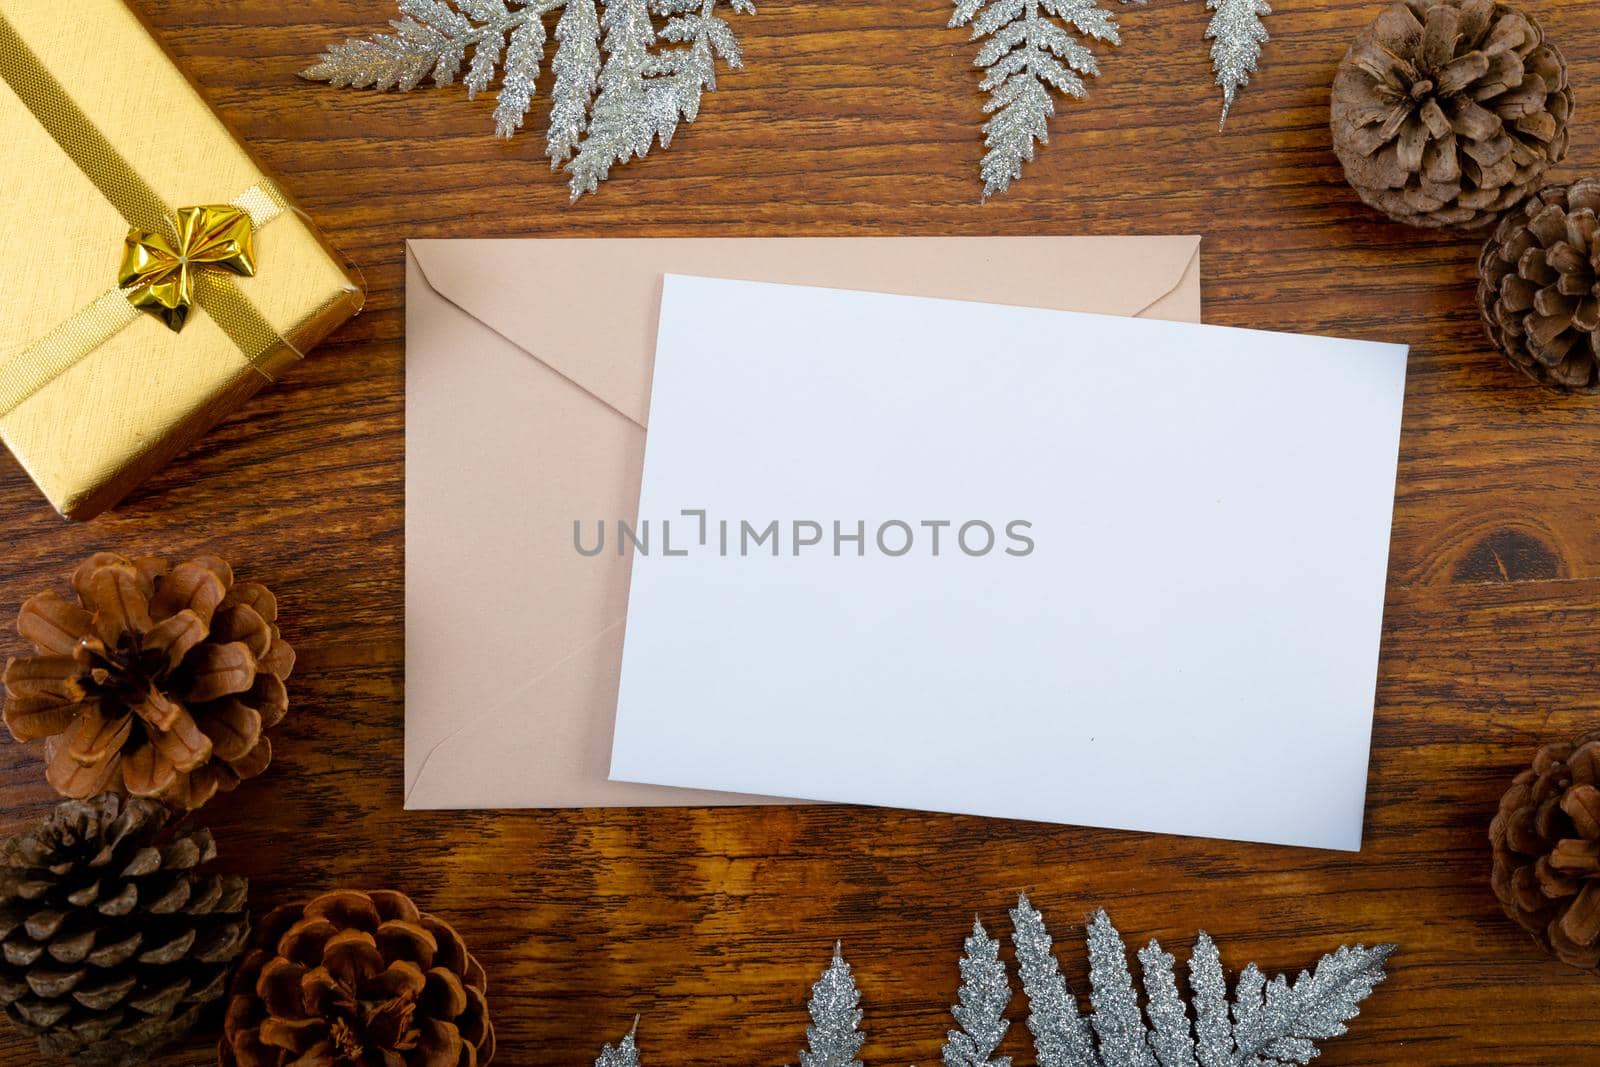 Composition of white card with copy space, envelope and christmas decorations on wooden background. christmas, communication, tradition and celebration concept.